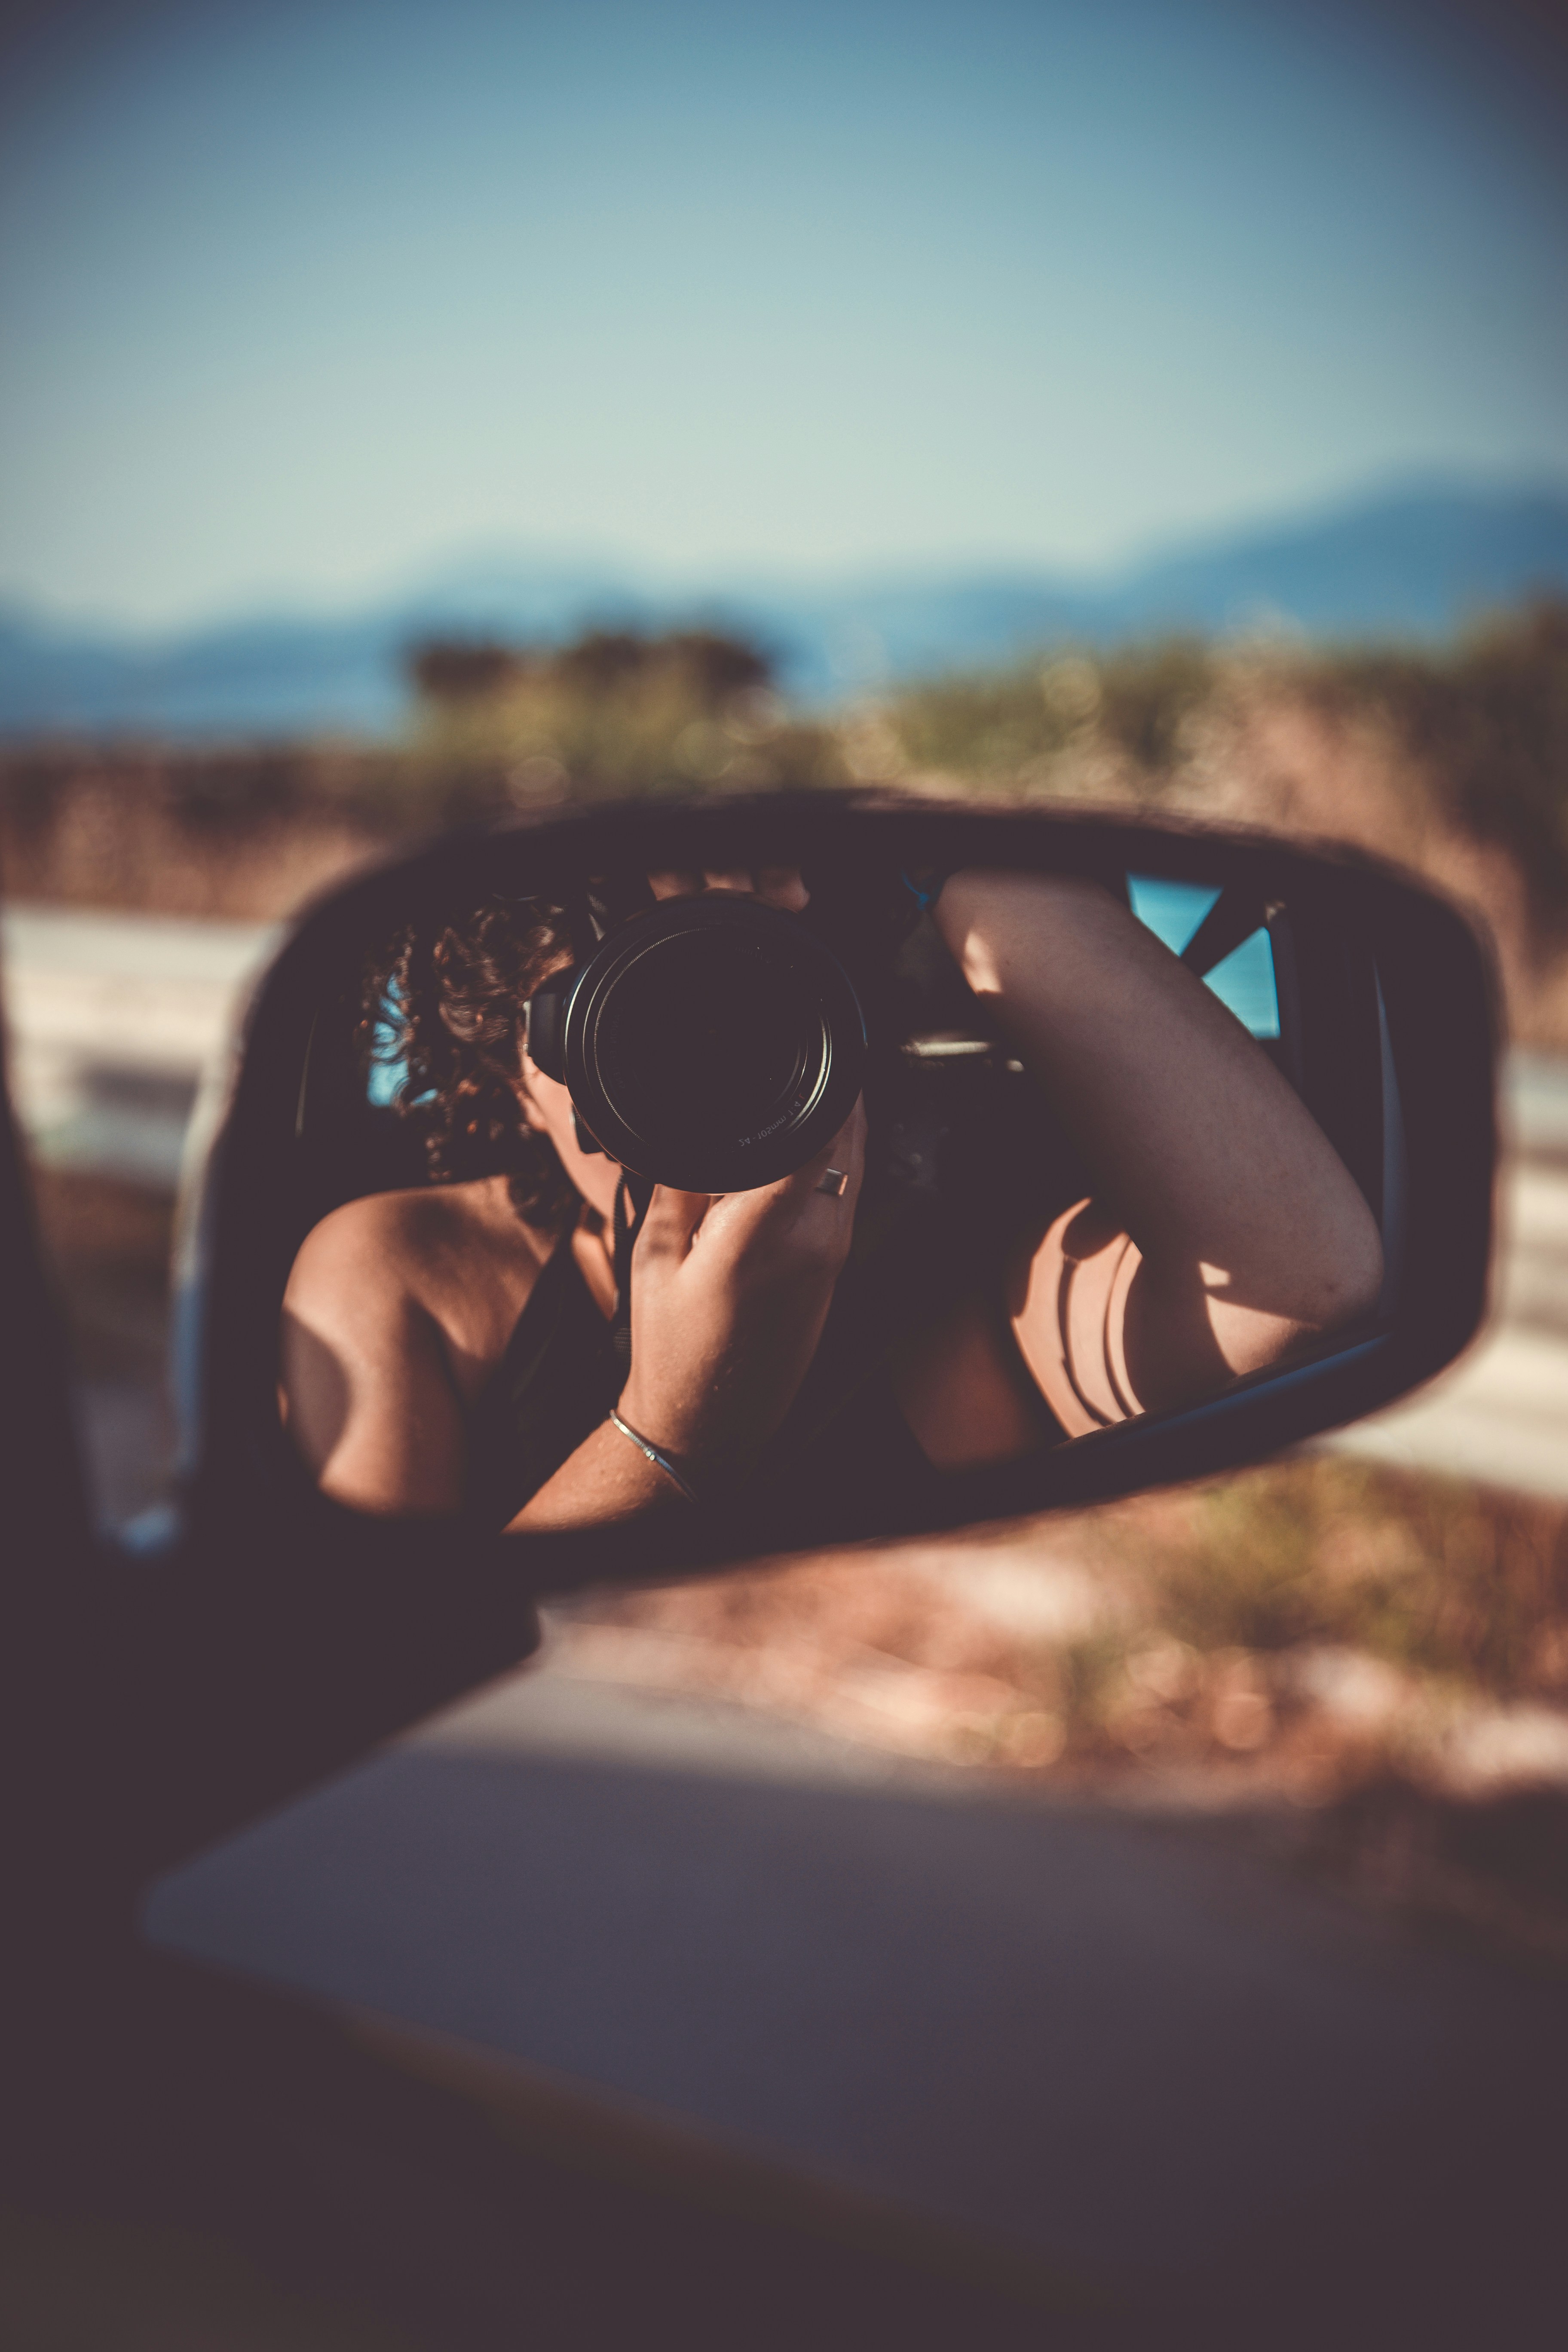 Photographer with camera with a big lens takes self-portrait in car’s wing mirror